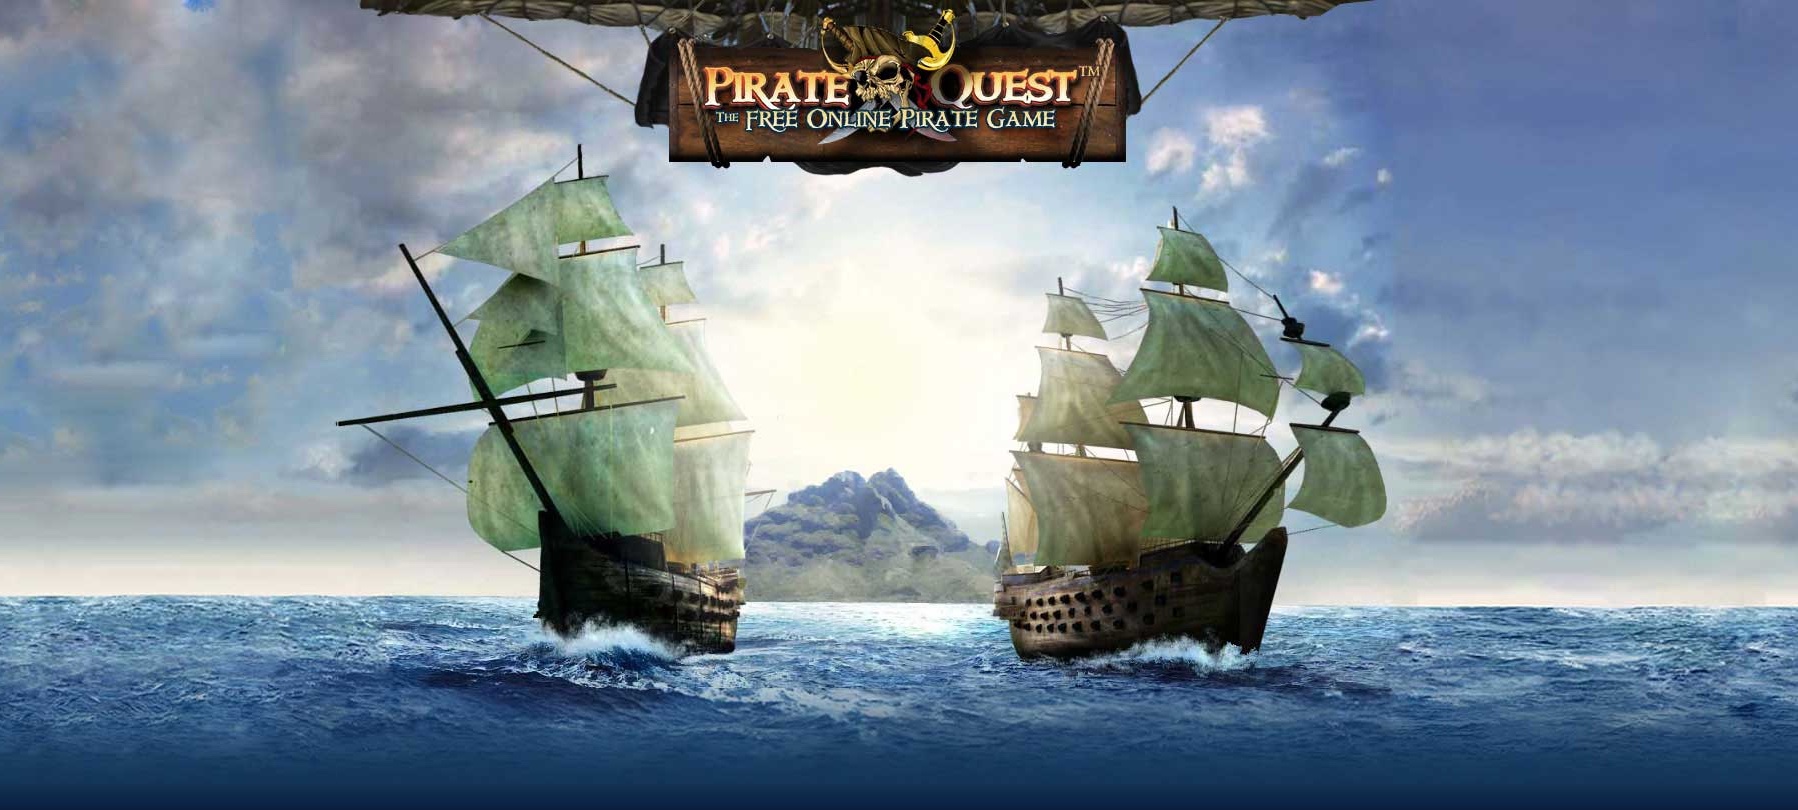 Is There a Game Like Pirate Quest?